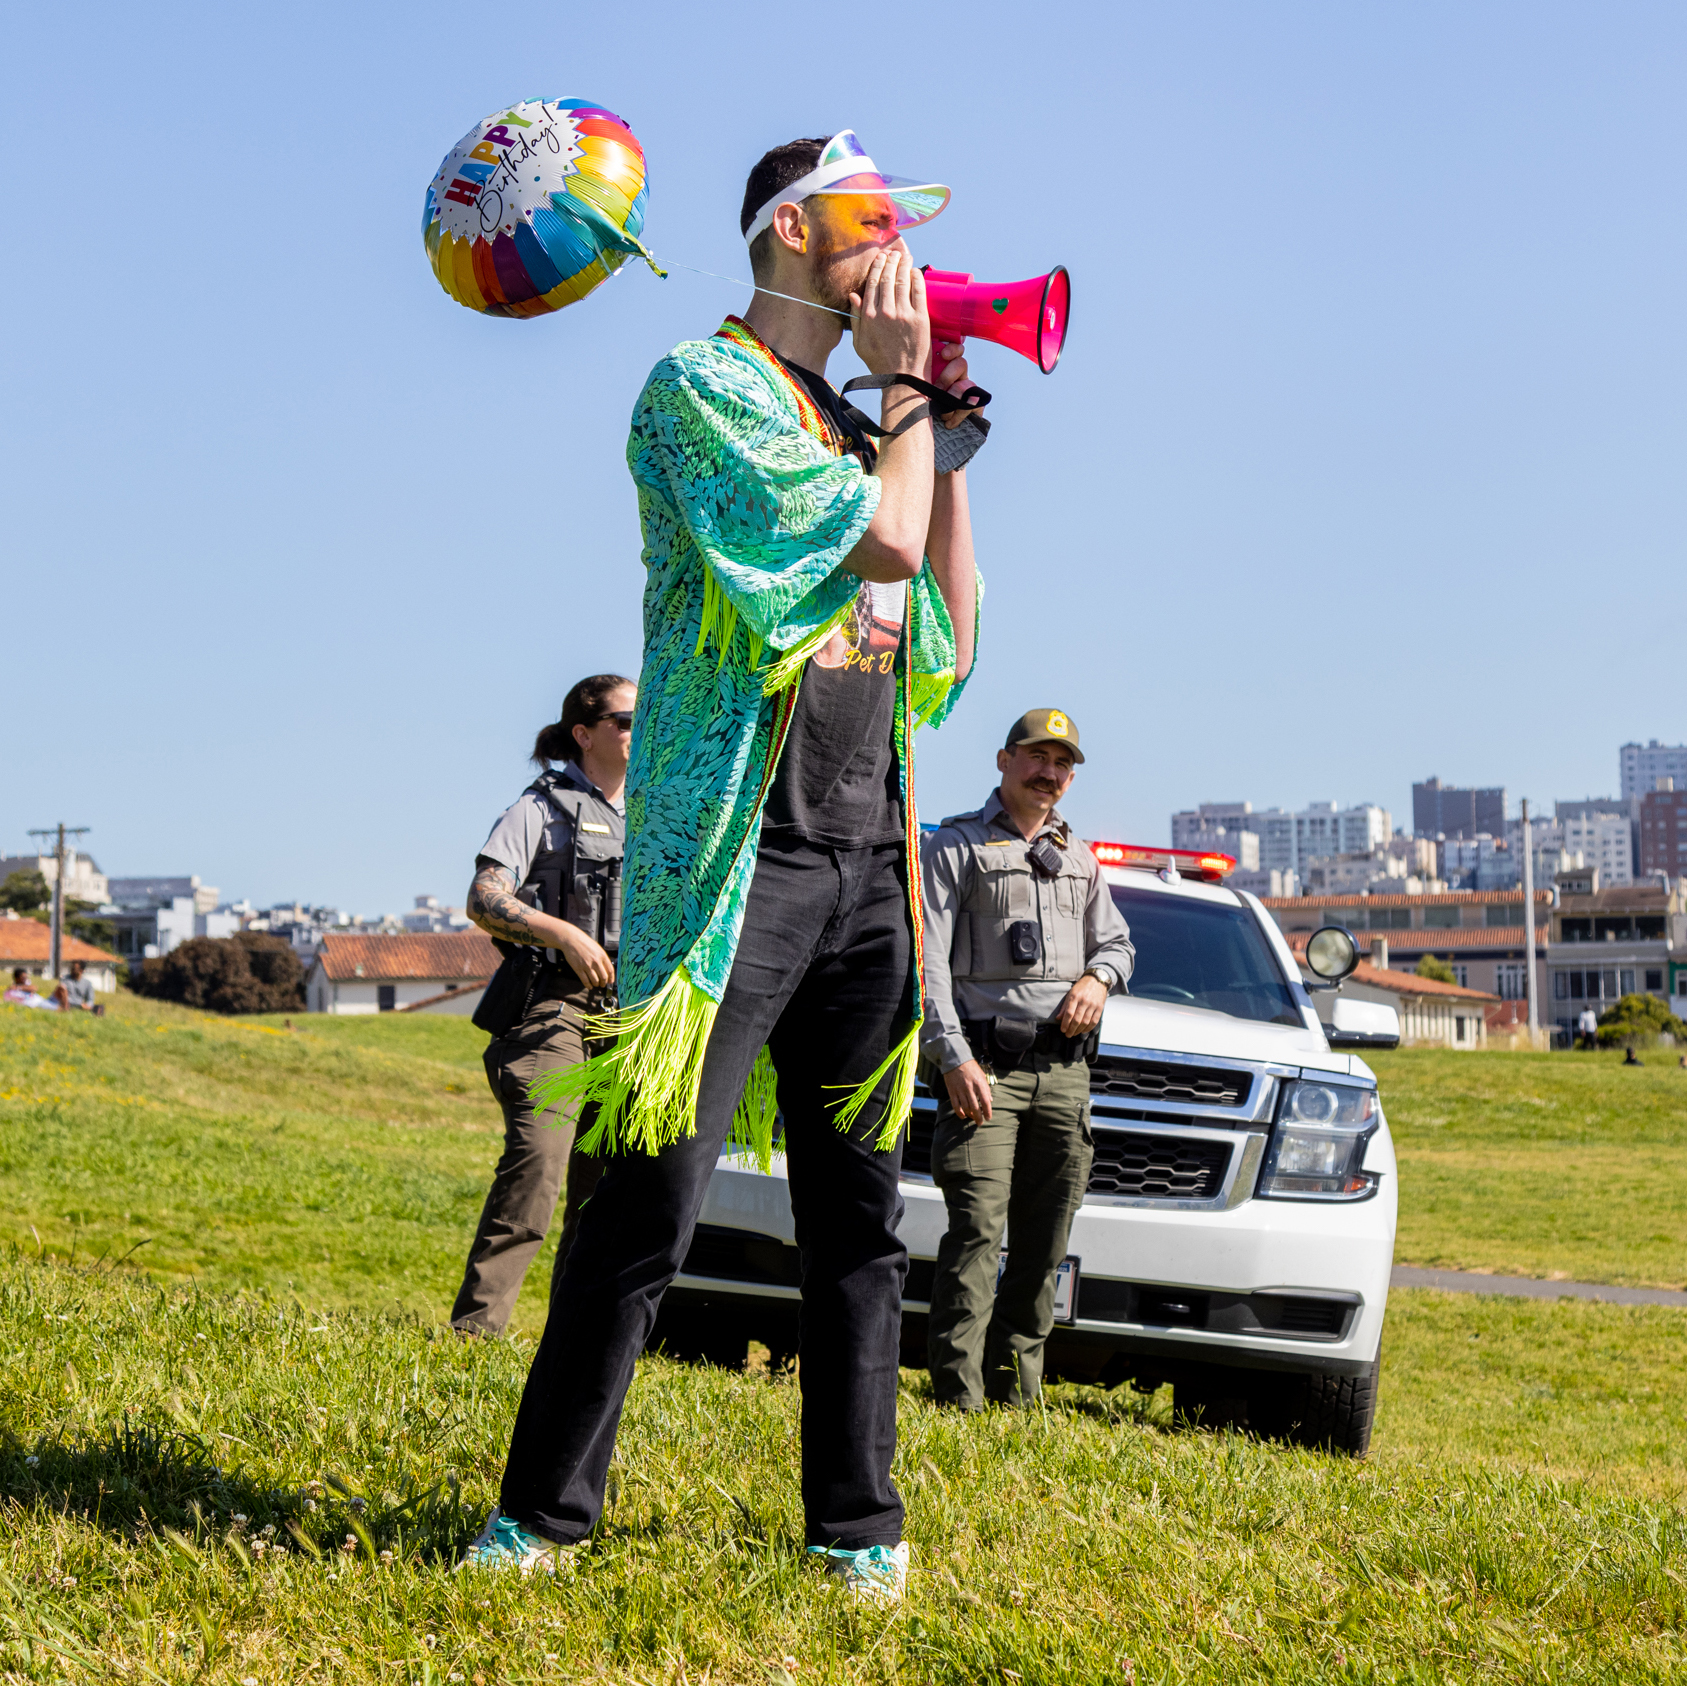 A man in a party hat and colorful shawl speaks into a megaphone at a sunny park, flanked by uniformed officers near a patrol car.